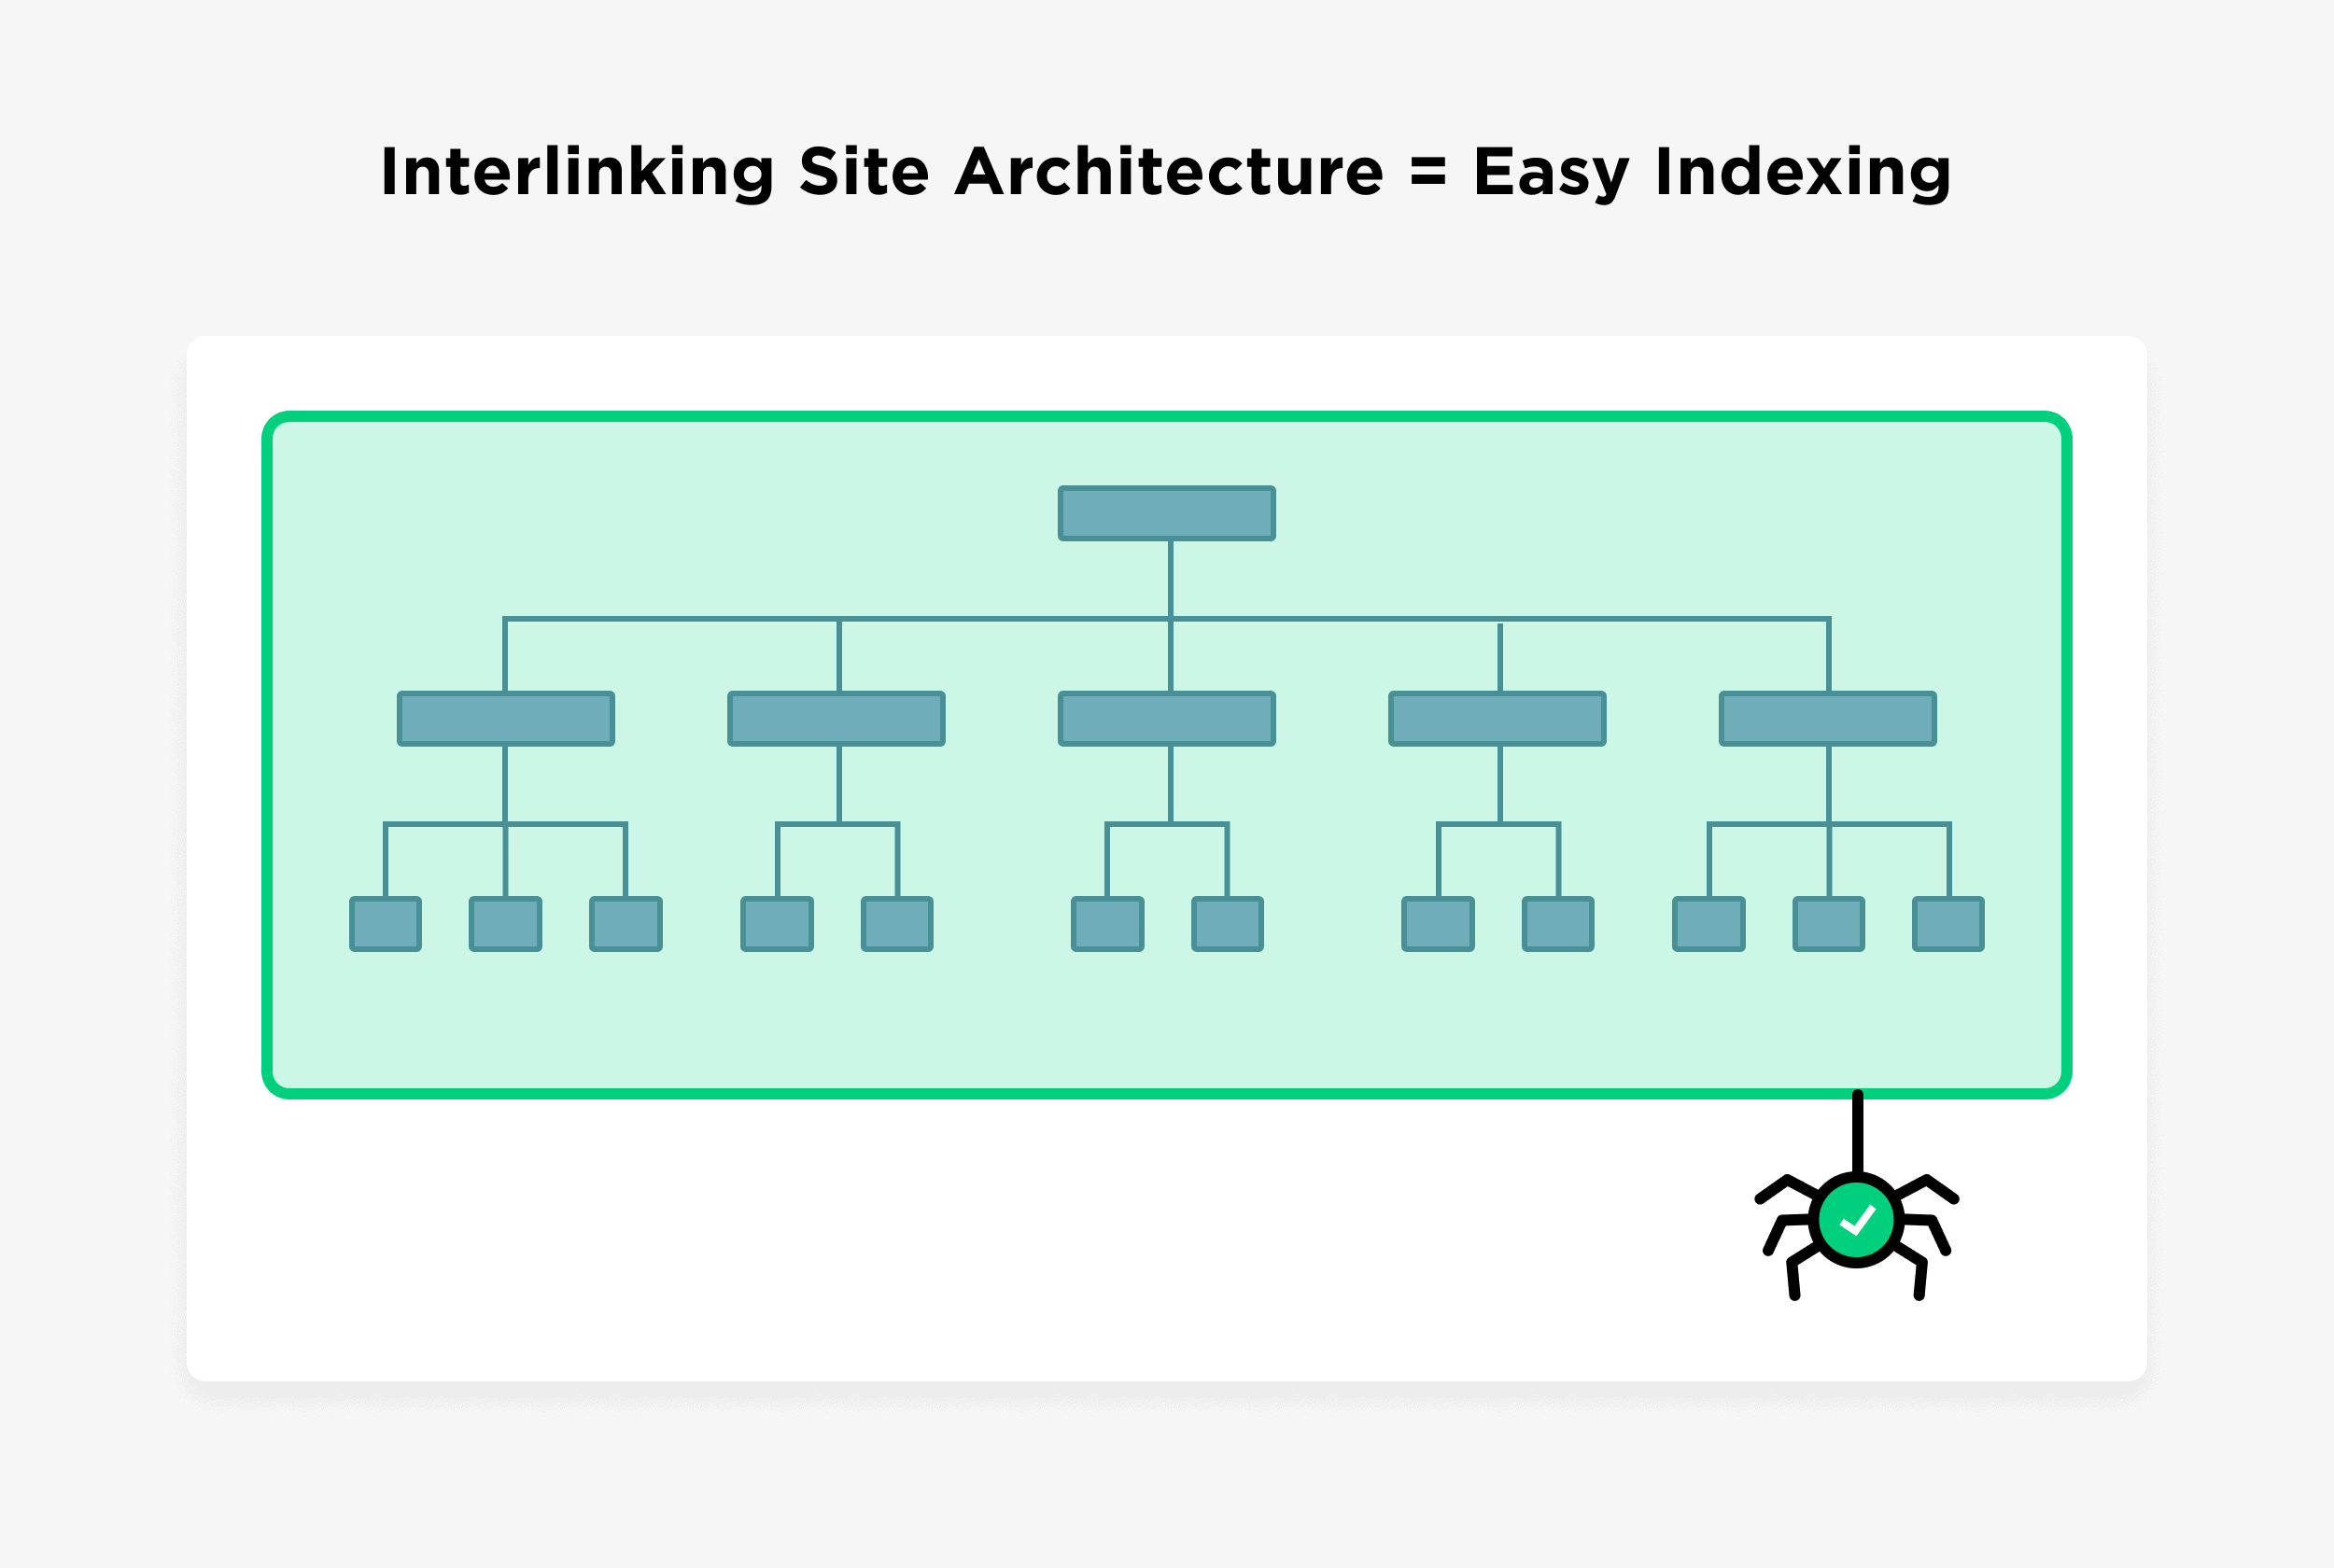 interlinking site architecture equals easy